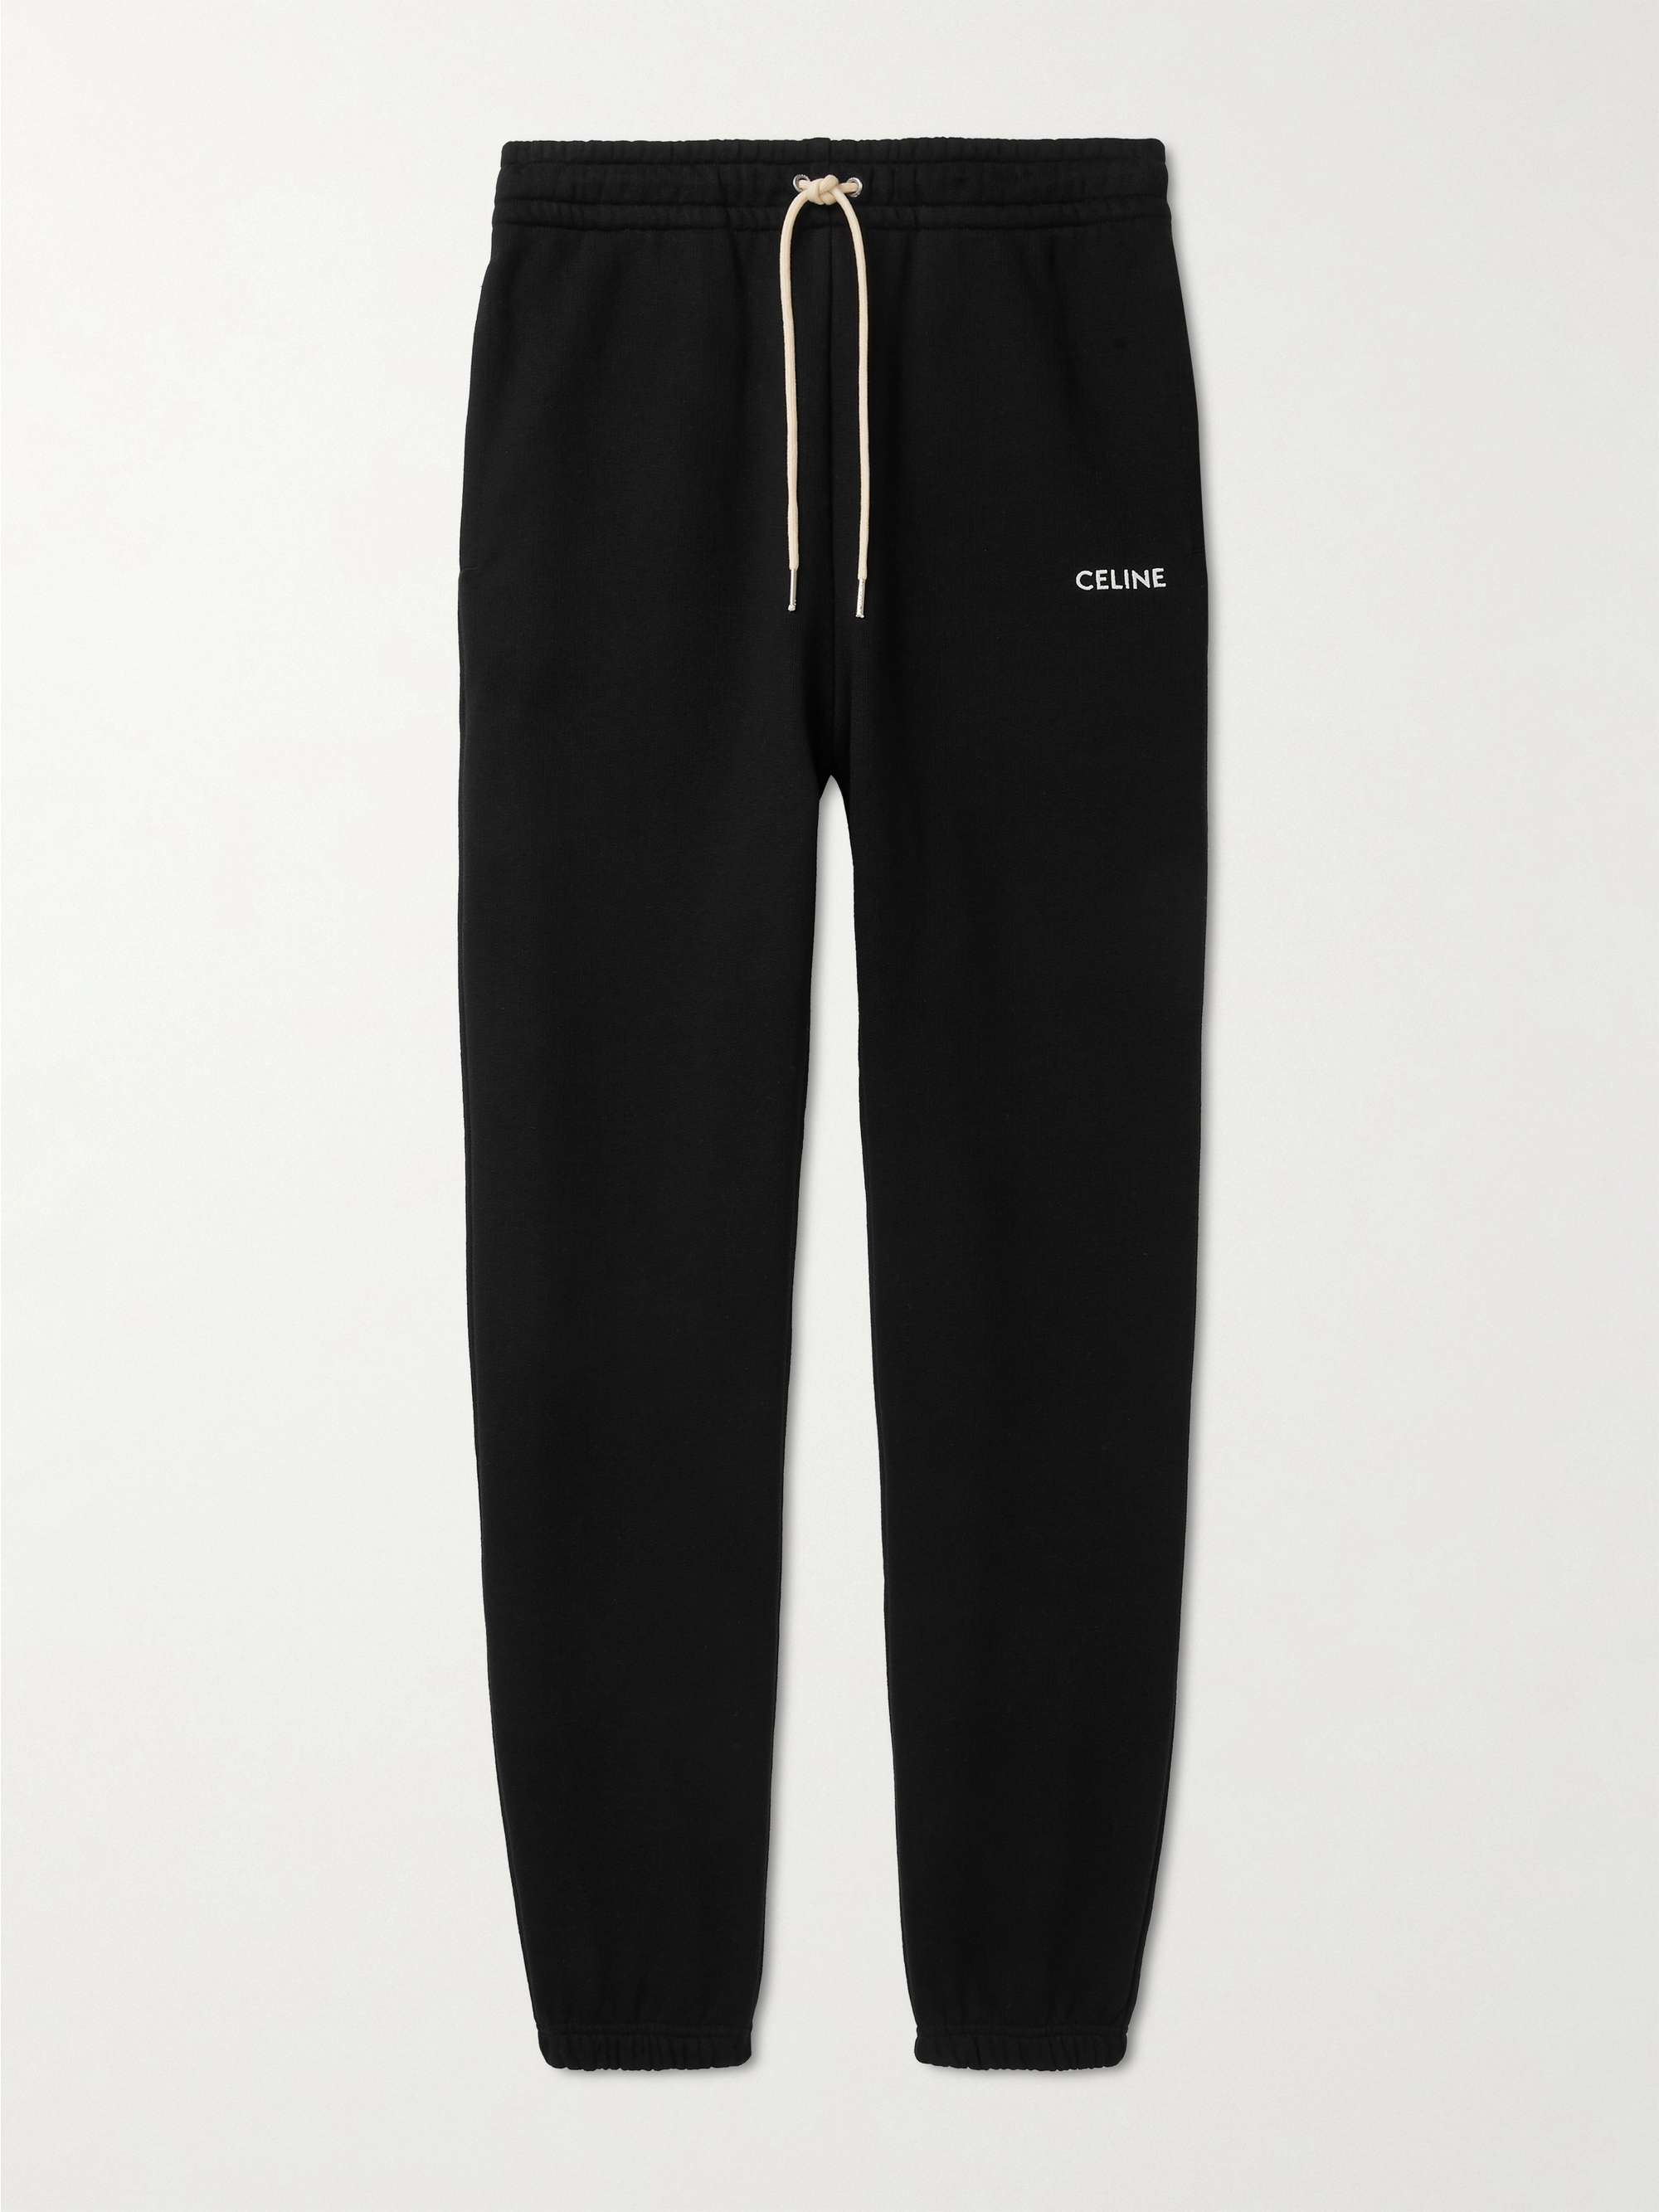 CELINE HOMME Slim-Fit Tapered Logo-Embroidered Cotton-Jersey Sweatpants